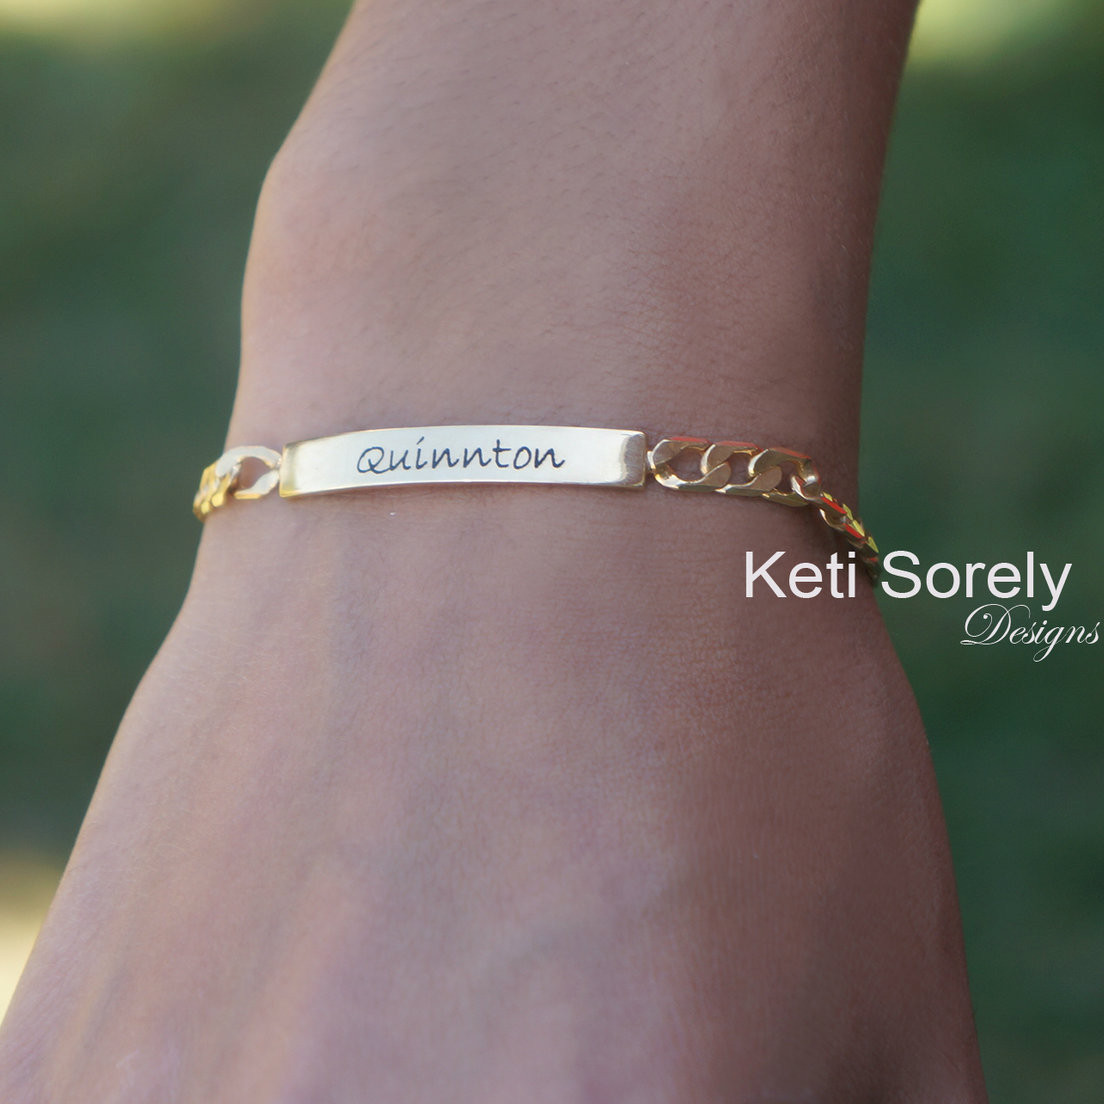 Engraved Monogram Initials Bracelet, Personalized Toggle Monogram Bracelet  in Silver, Yellow or Rose Gold, Large Chain Bracelet.